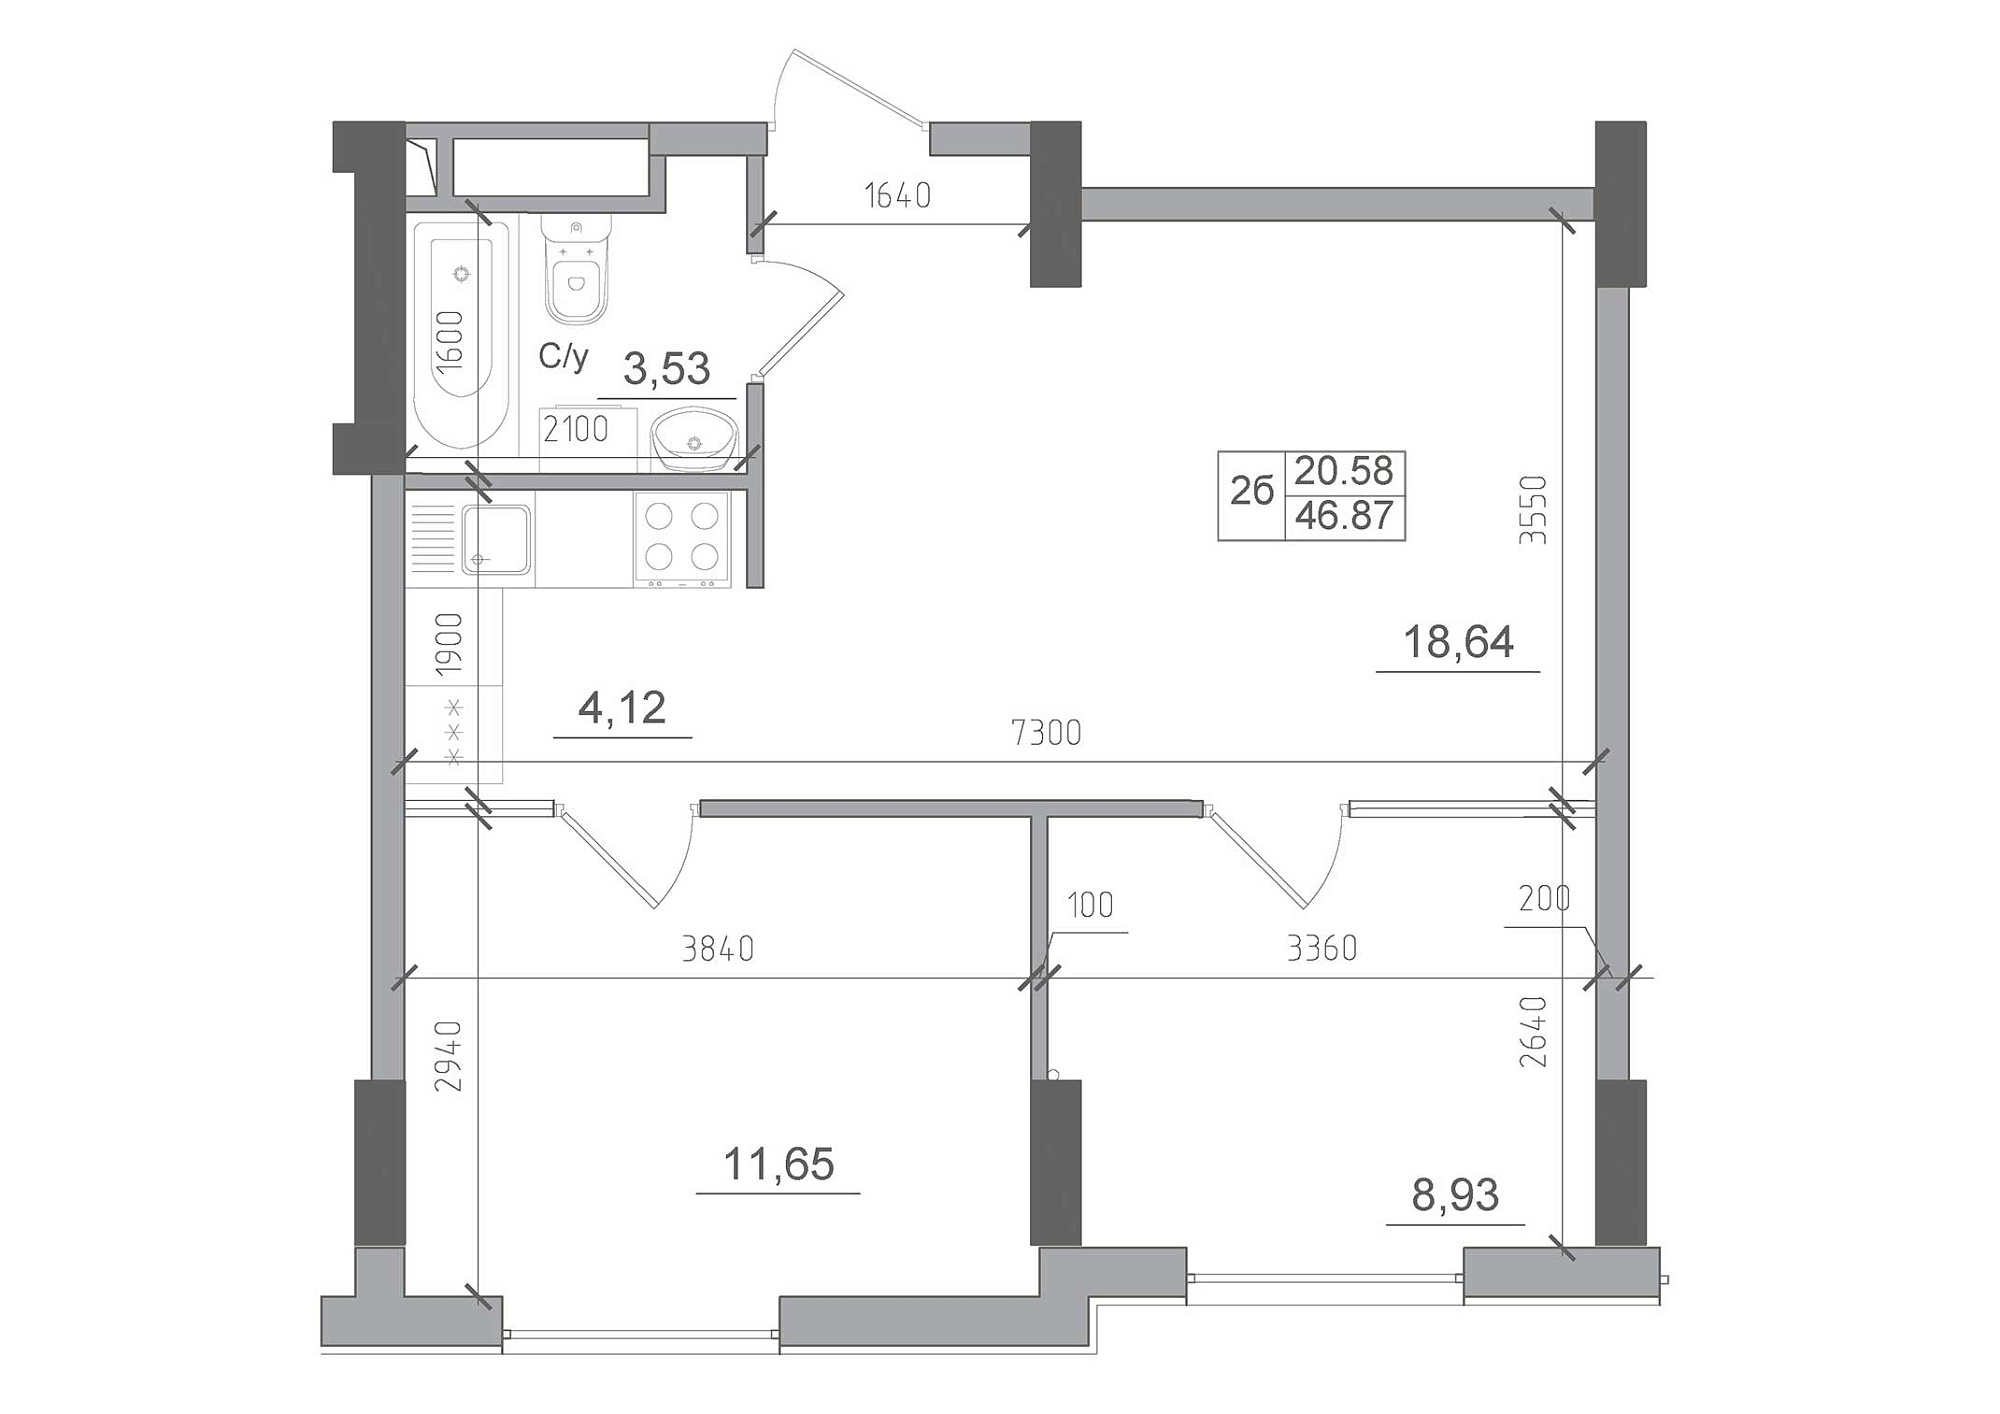 Planning 2-rm flats area 46.87m2, AB-22-02/00008.